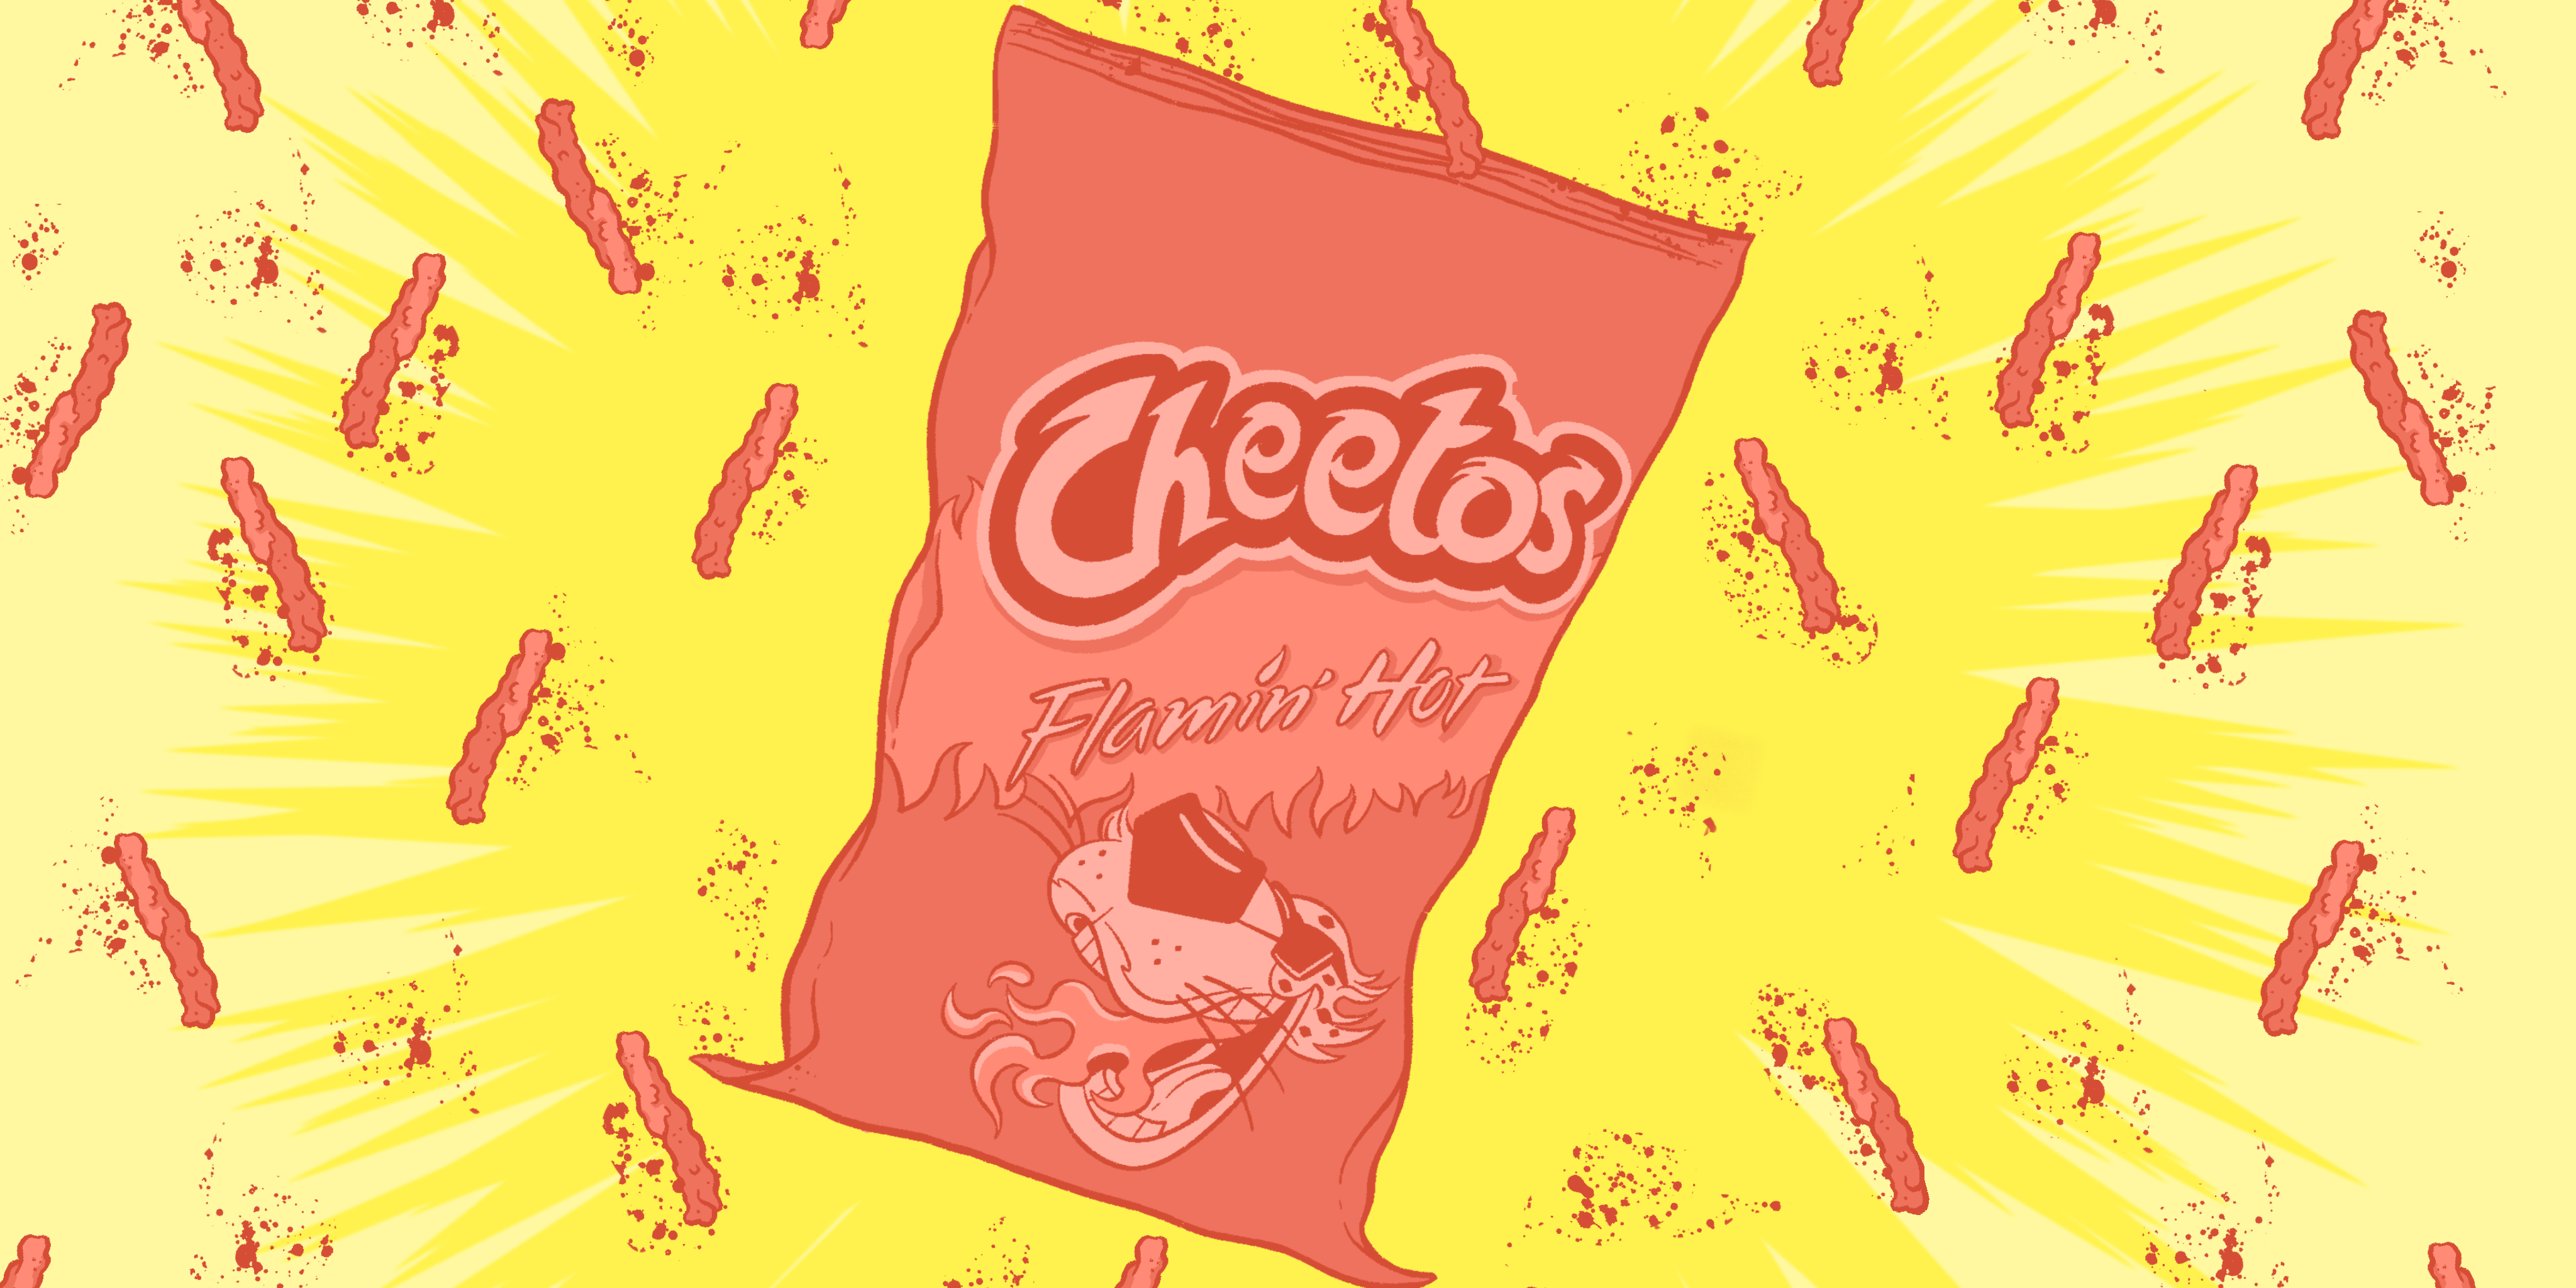 Illustration of a bag of Flaming Hot Cheetos on a background of single cheetos with scattered dust on a yellow background.